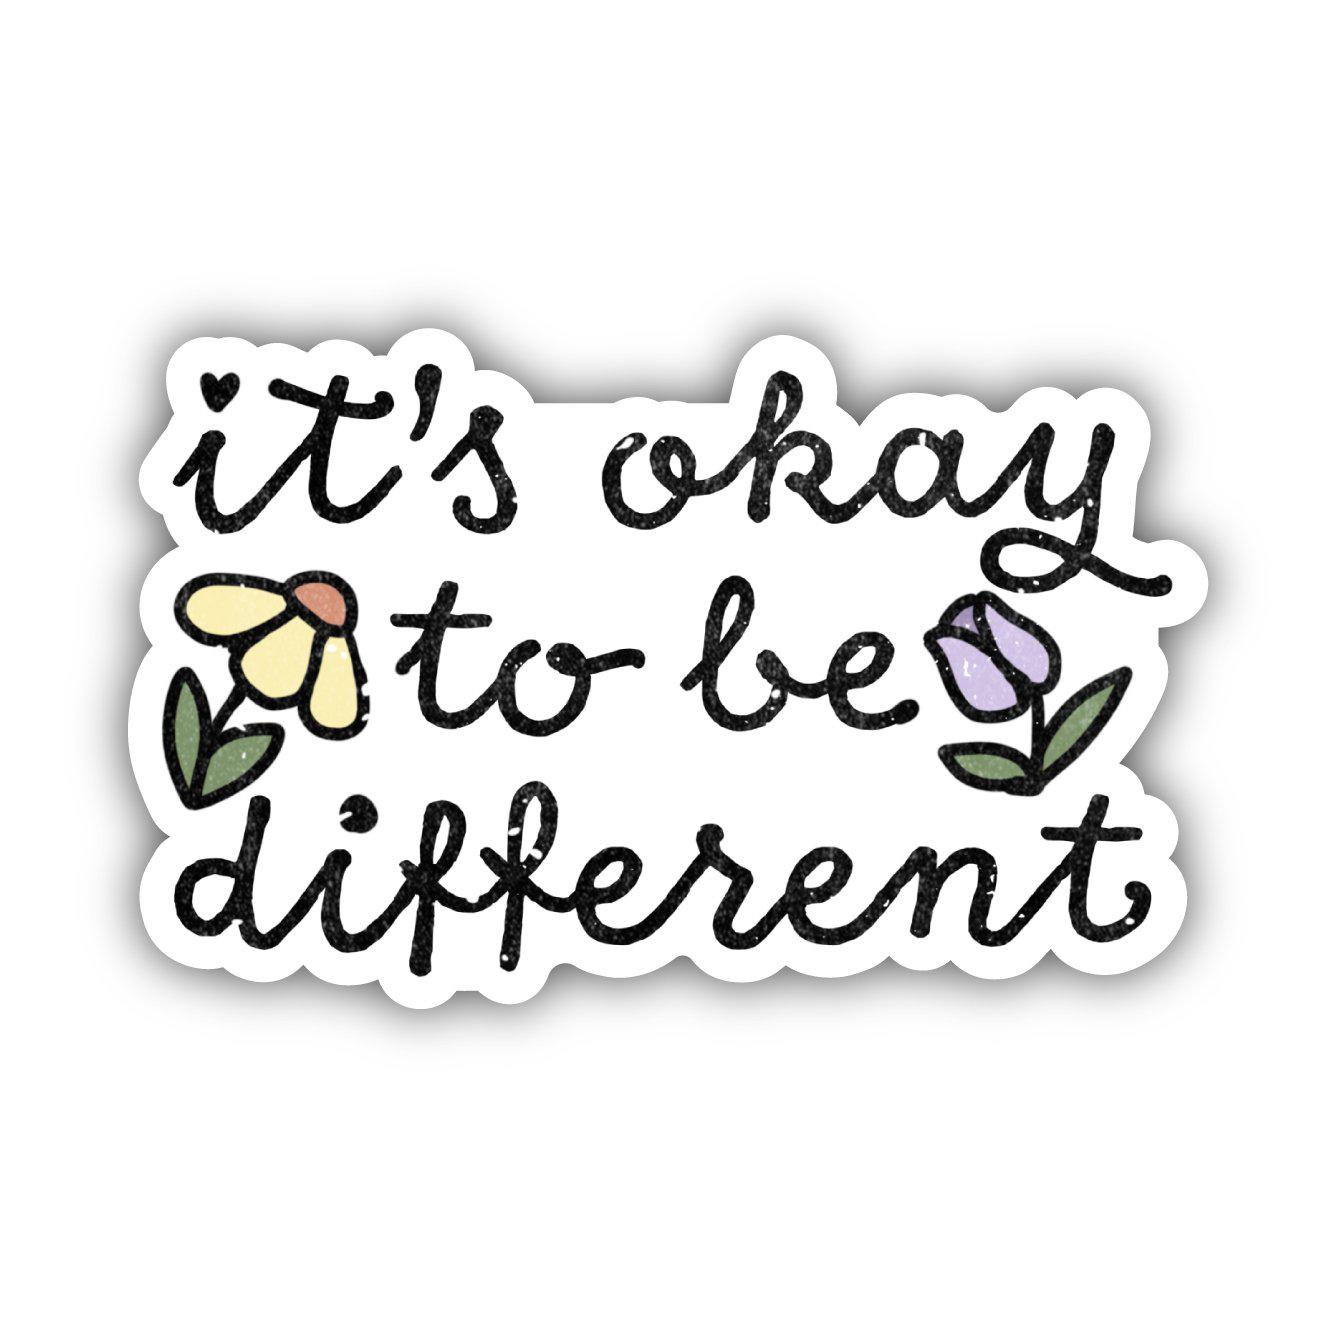 It's Okay To Be Different - Mental Health - Vinyl Decal Sticker - Mellow Monkey